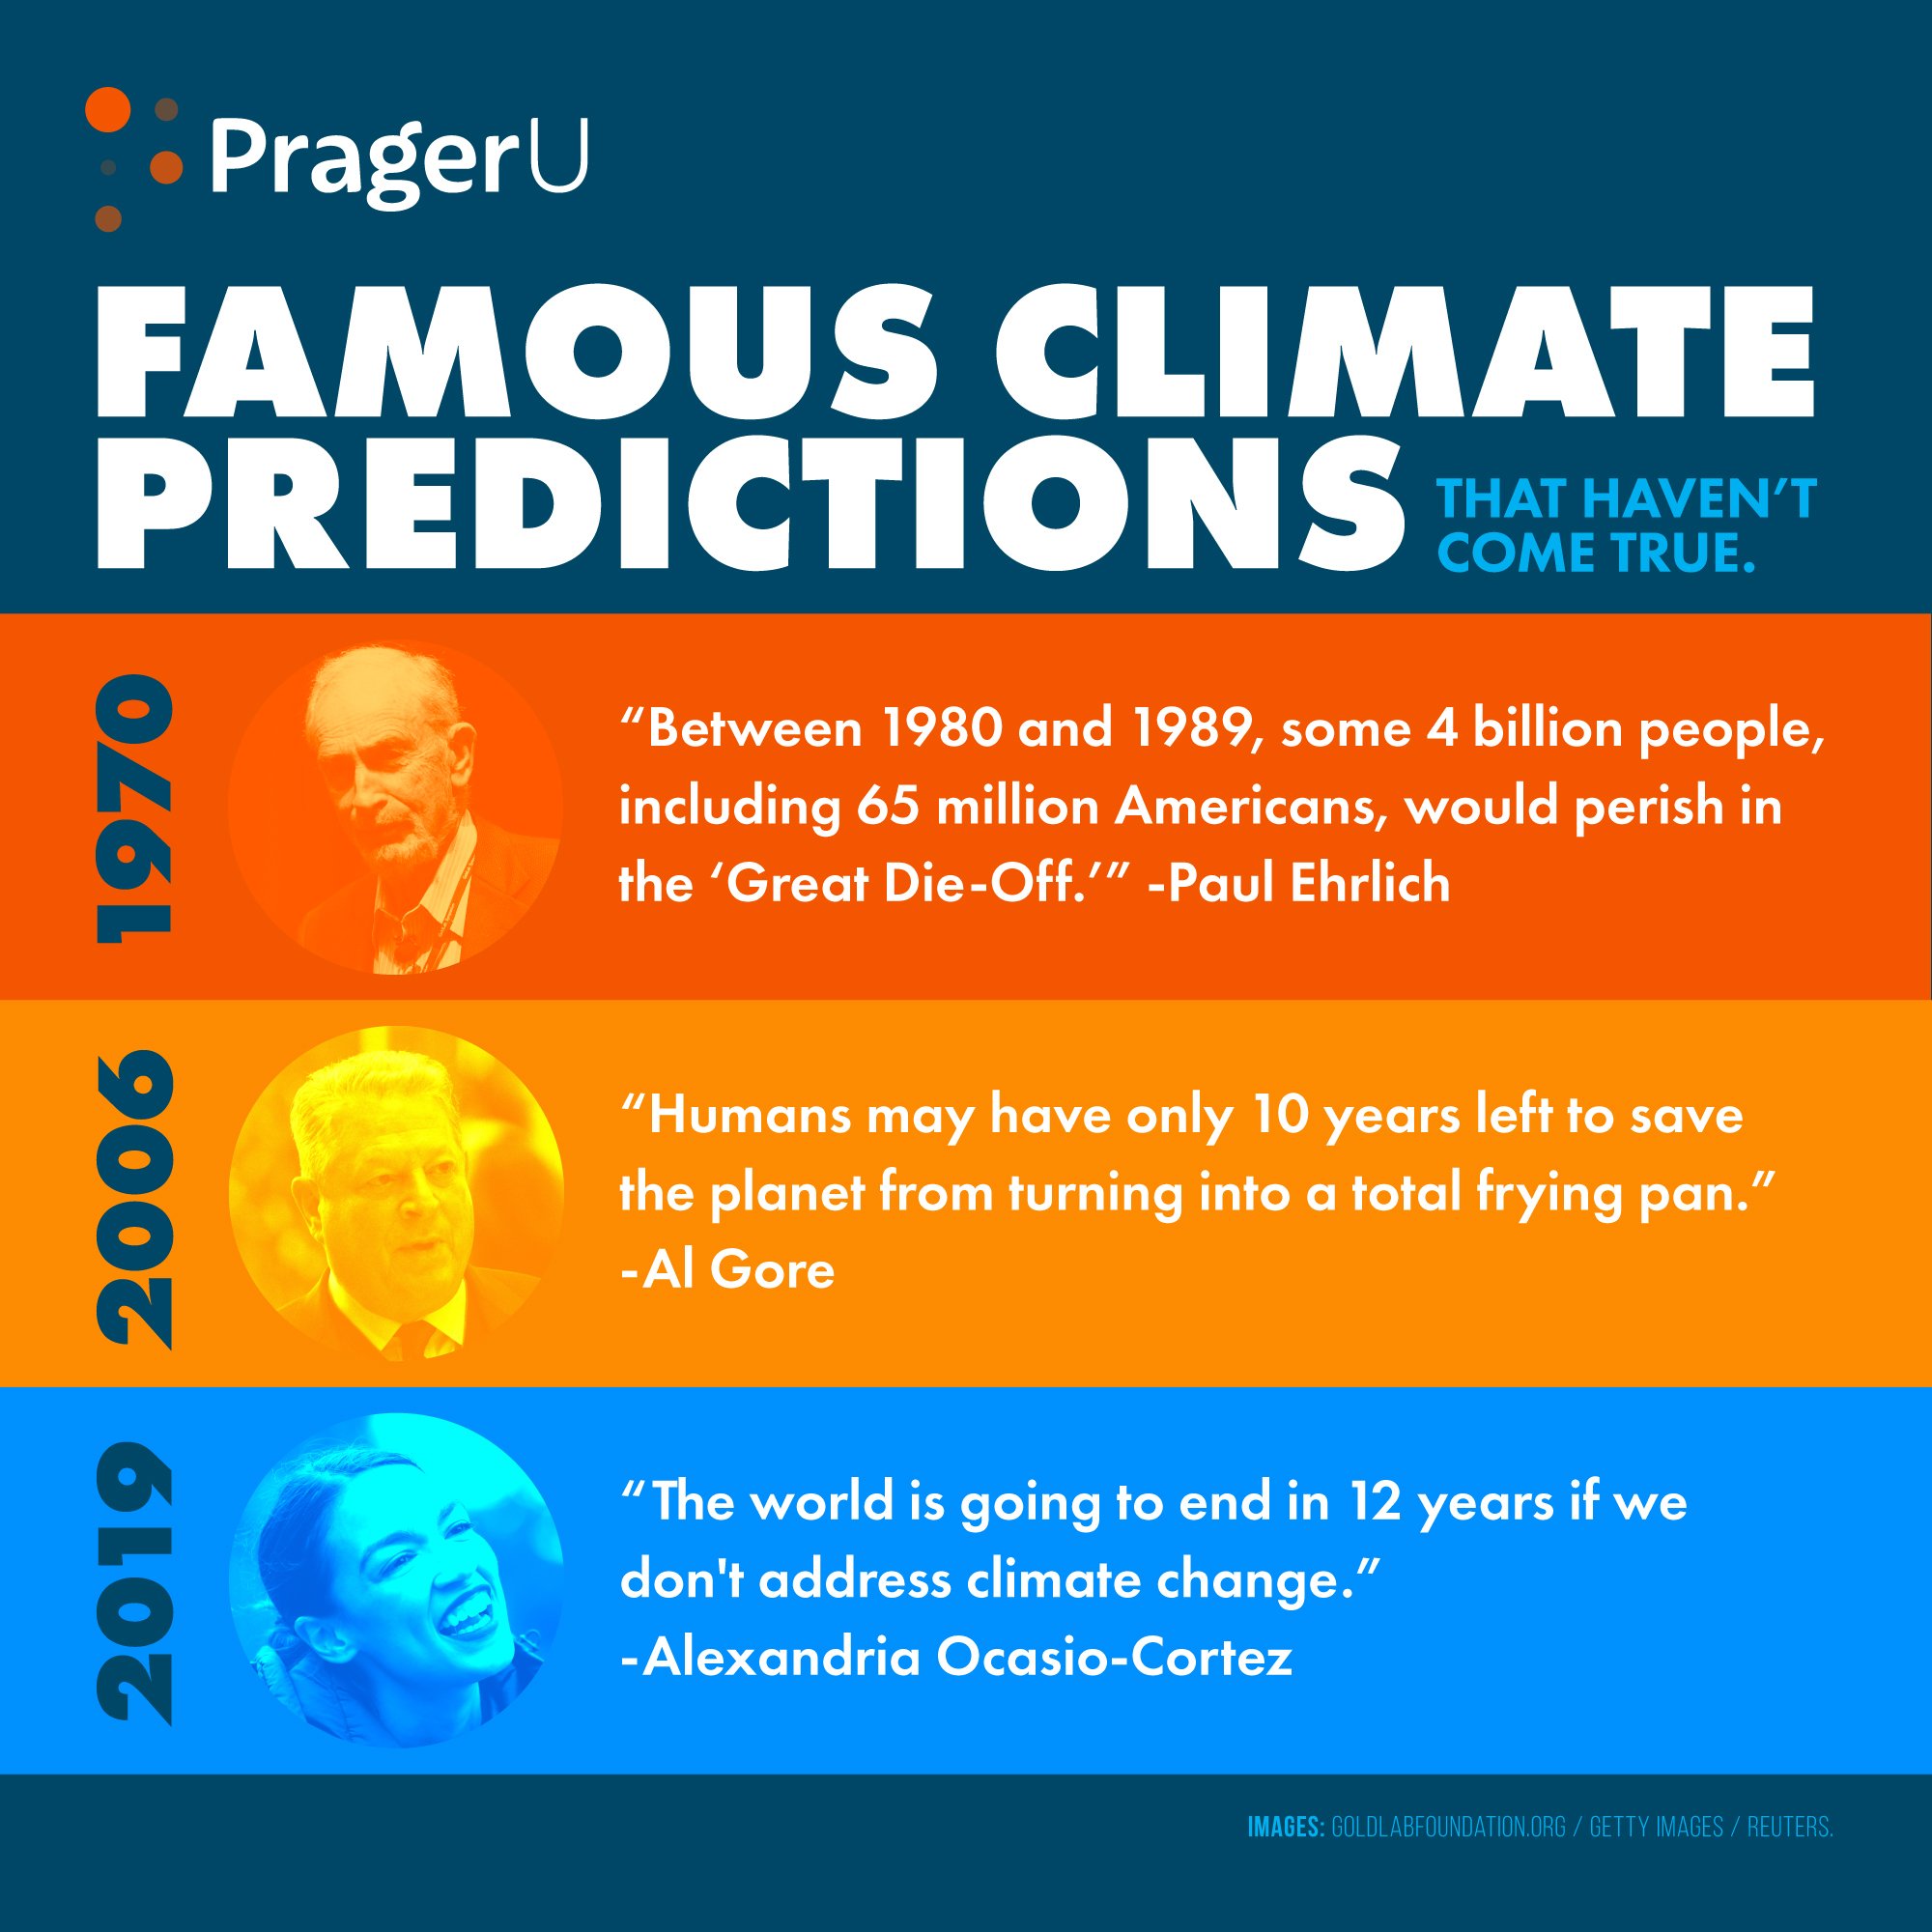 PragerU on Twitter: "Remember when the Left's predictions about climate  change actually came true? Neither do we. Watch: https://t.co/HzfufxcWc9  https://t.co/8HXo1eHCbs" / Twitter